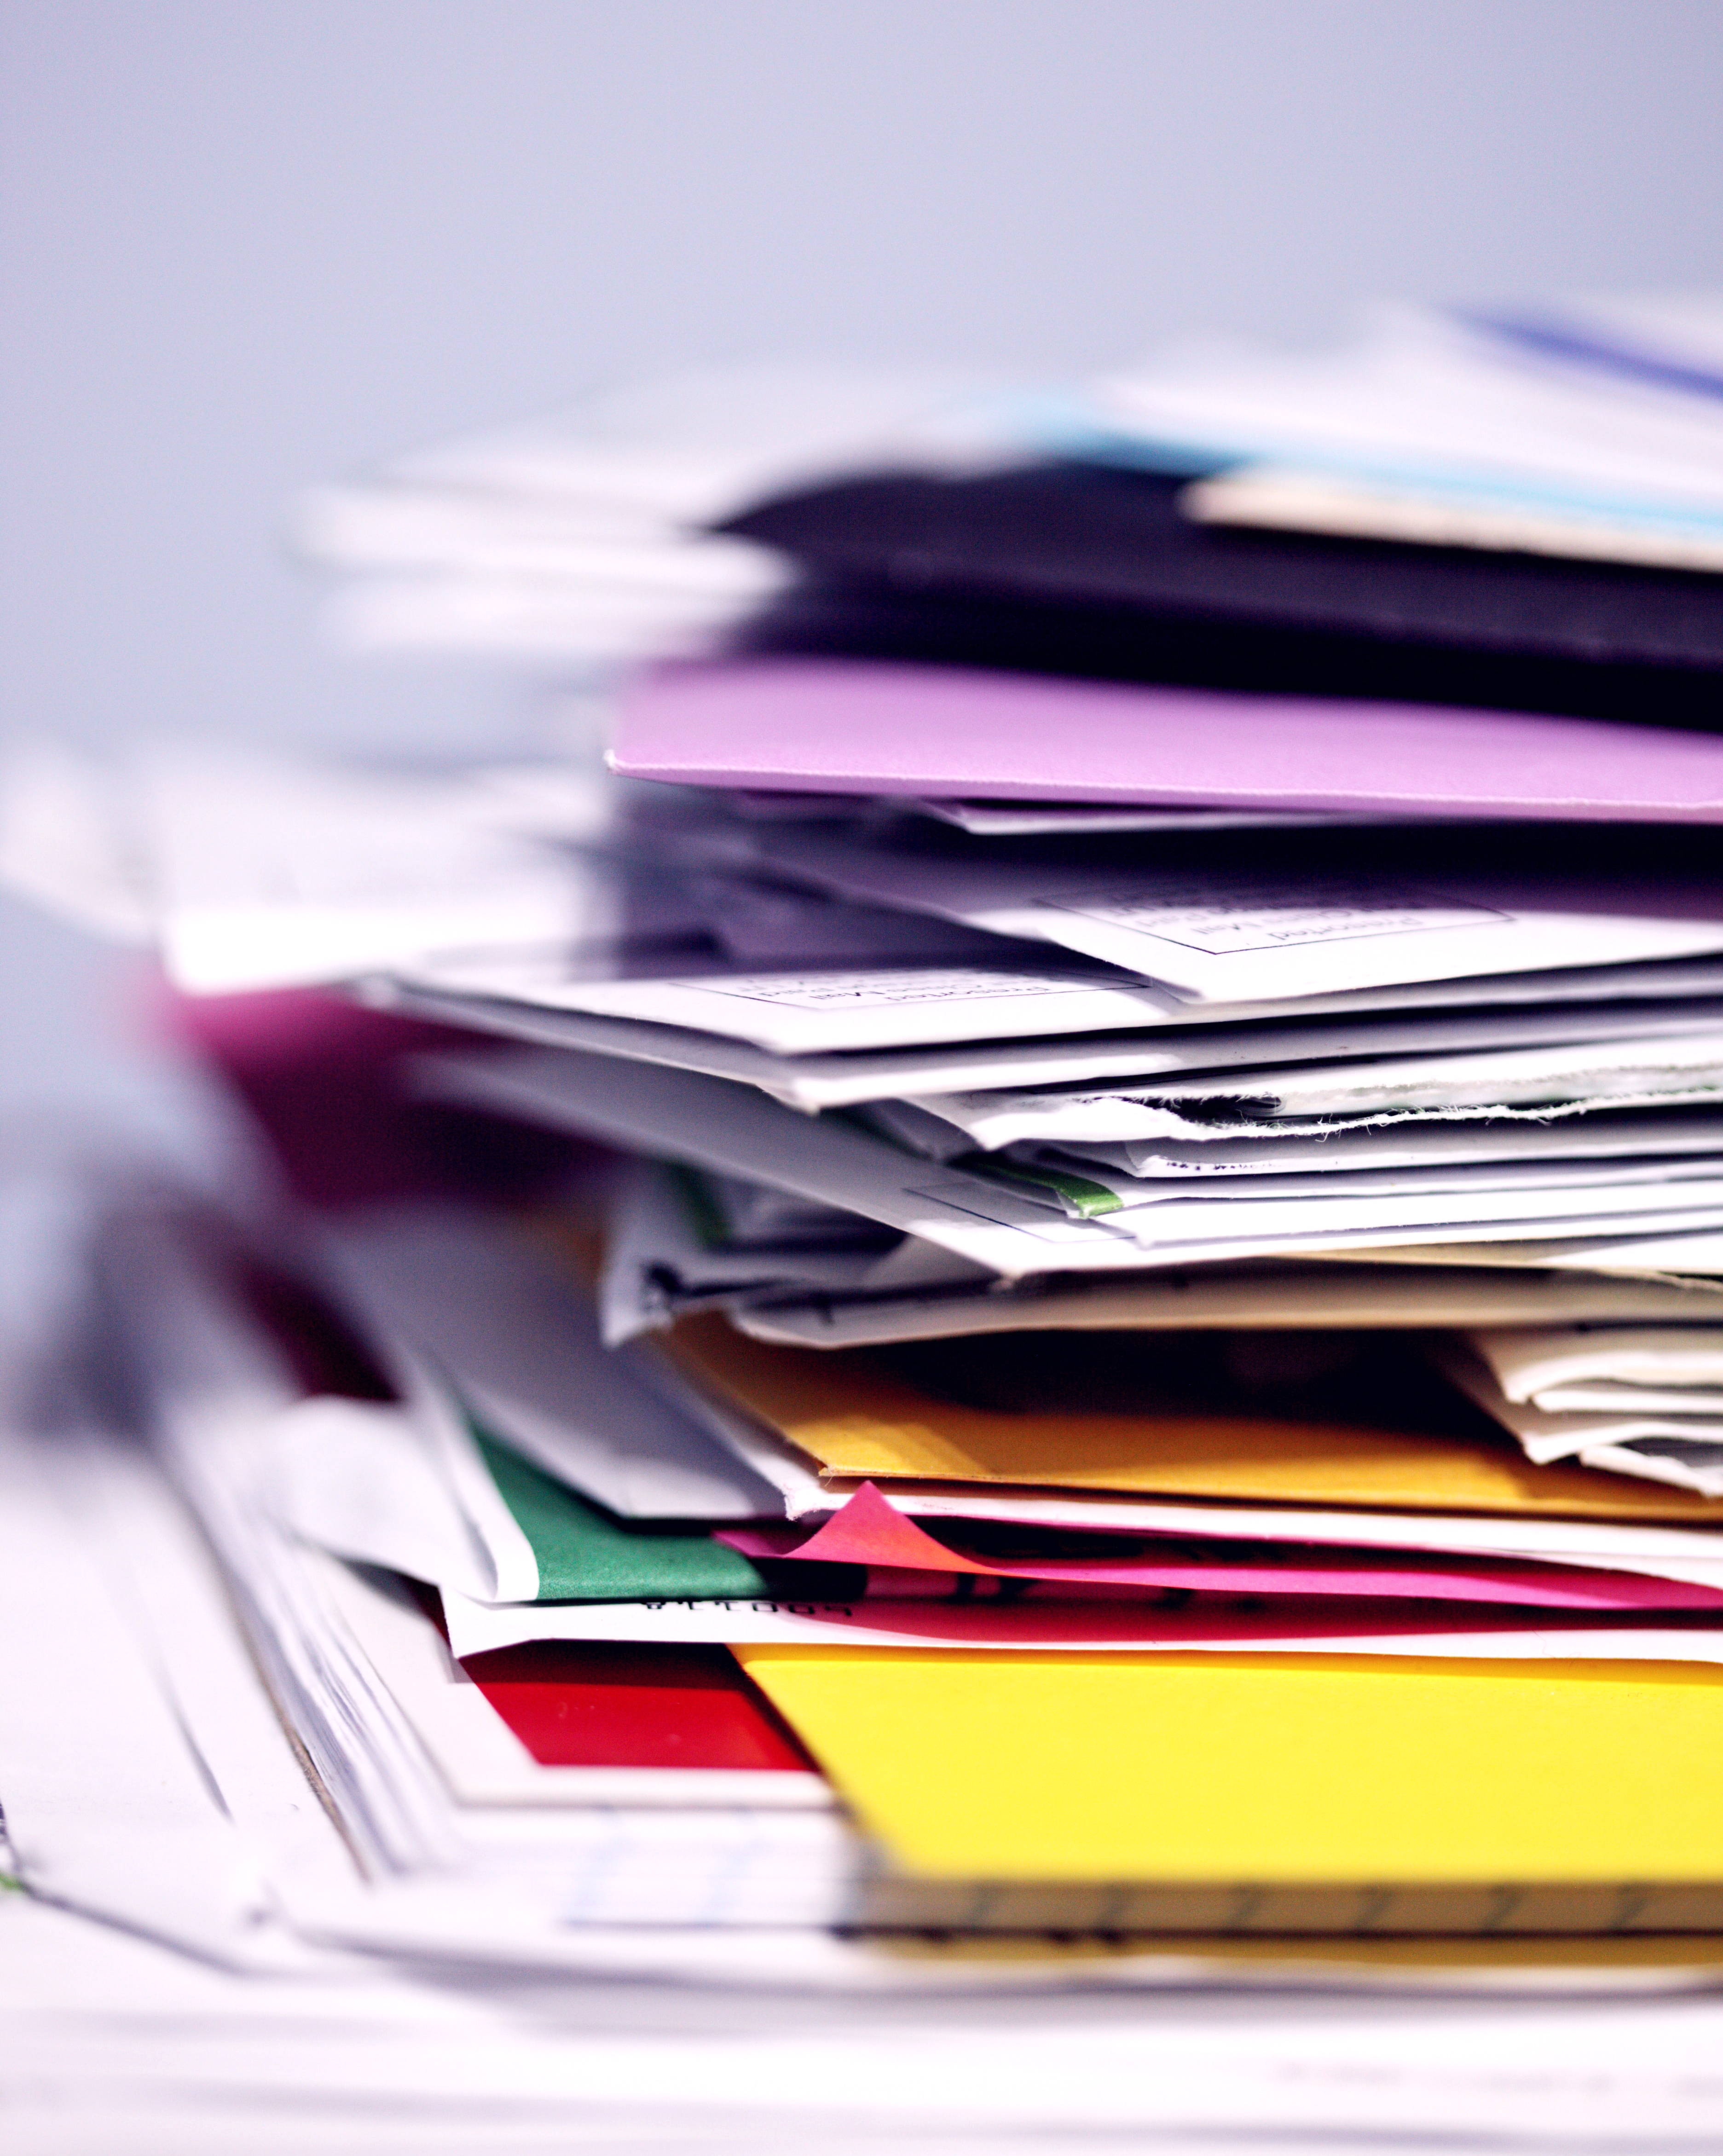 A Stack of Messy Papers Close-up on a Desk